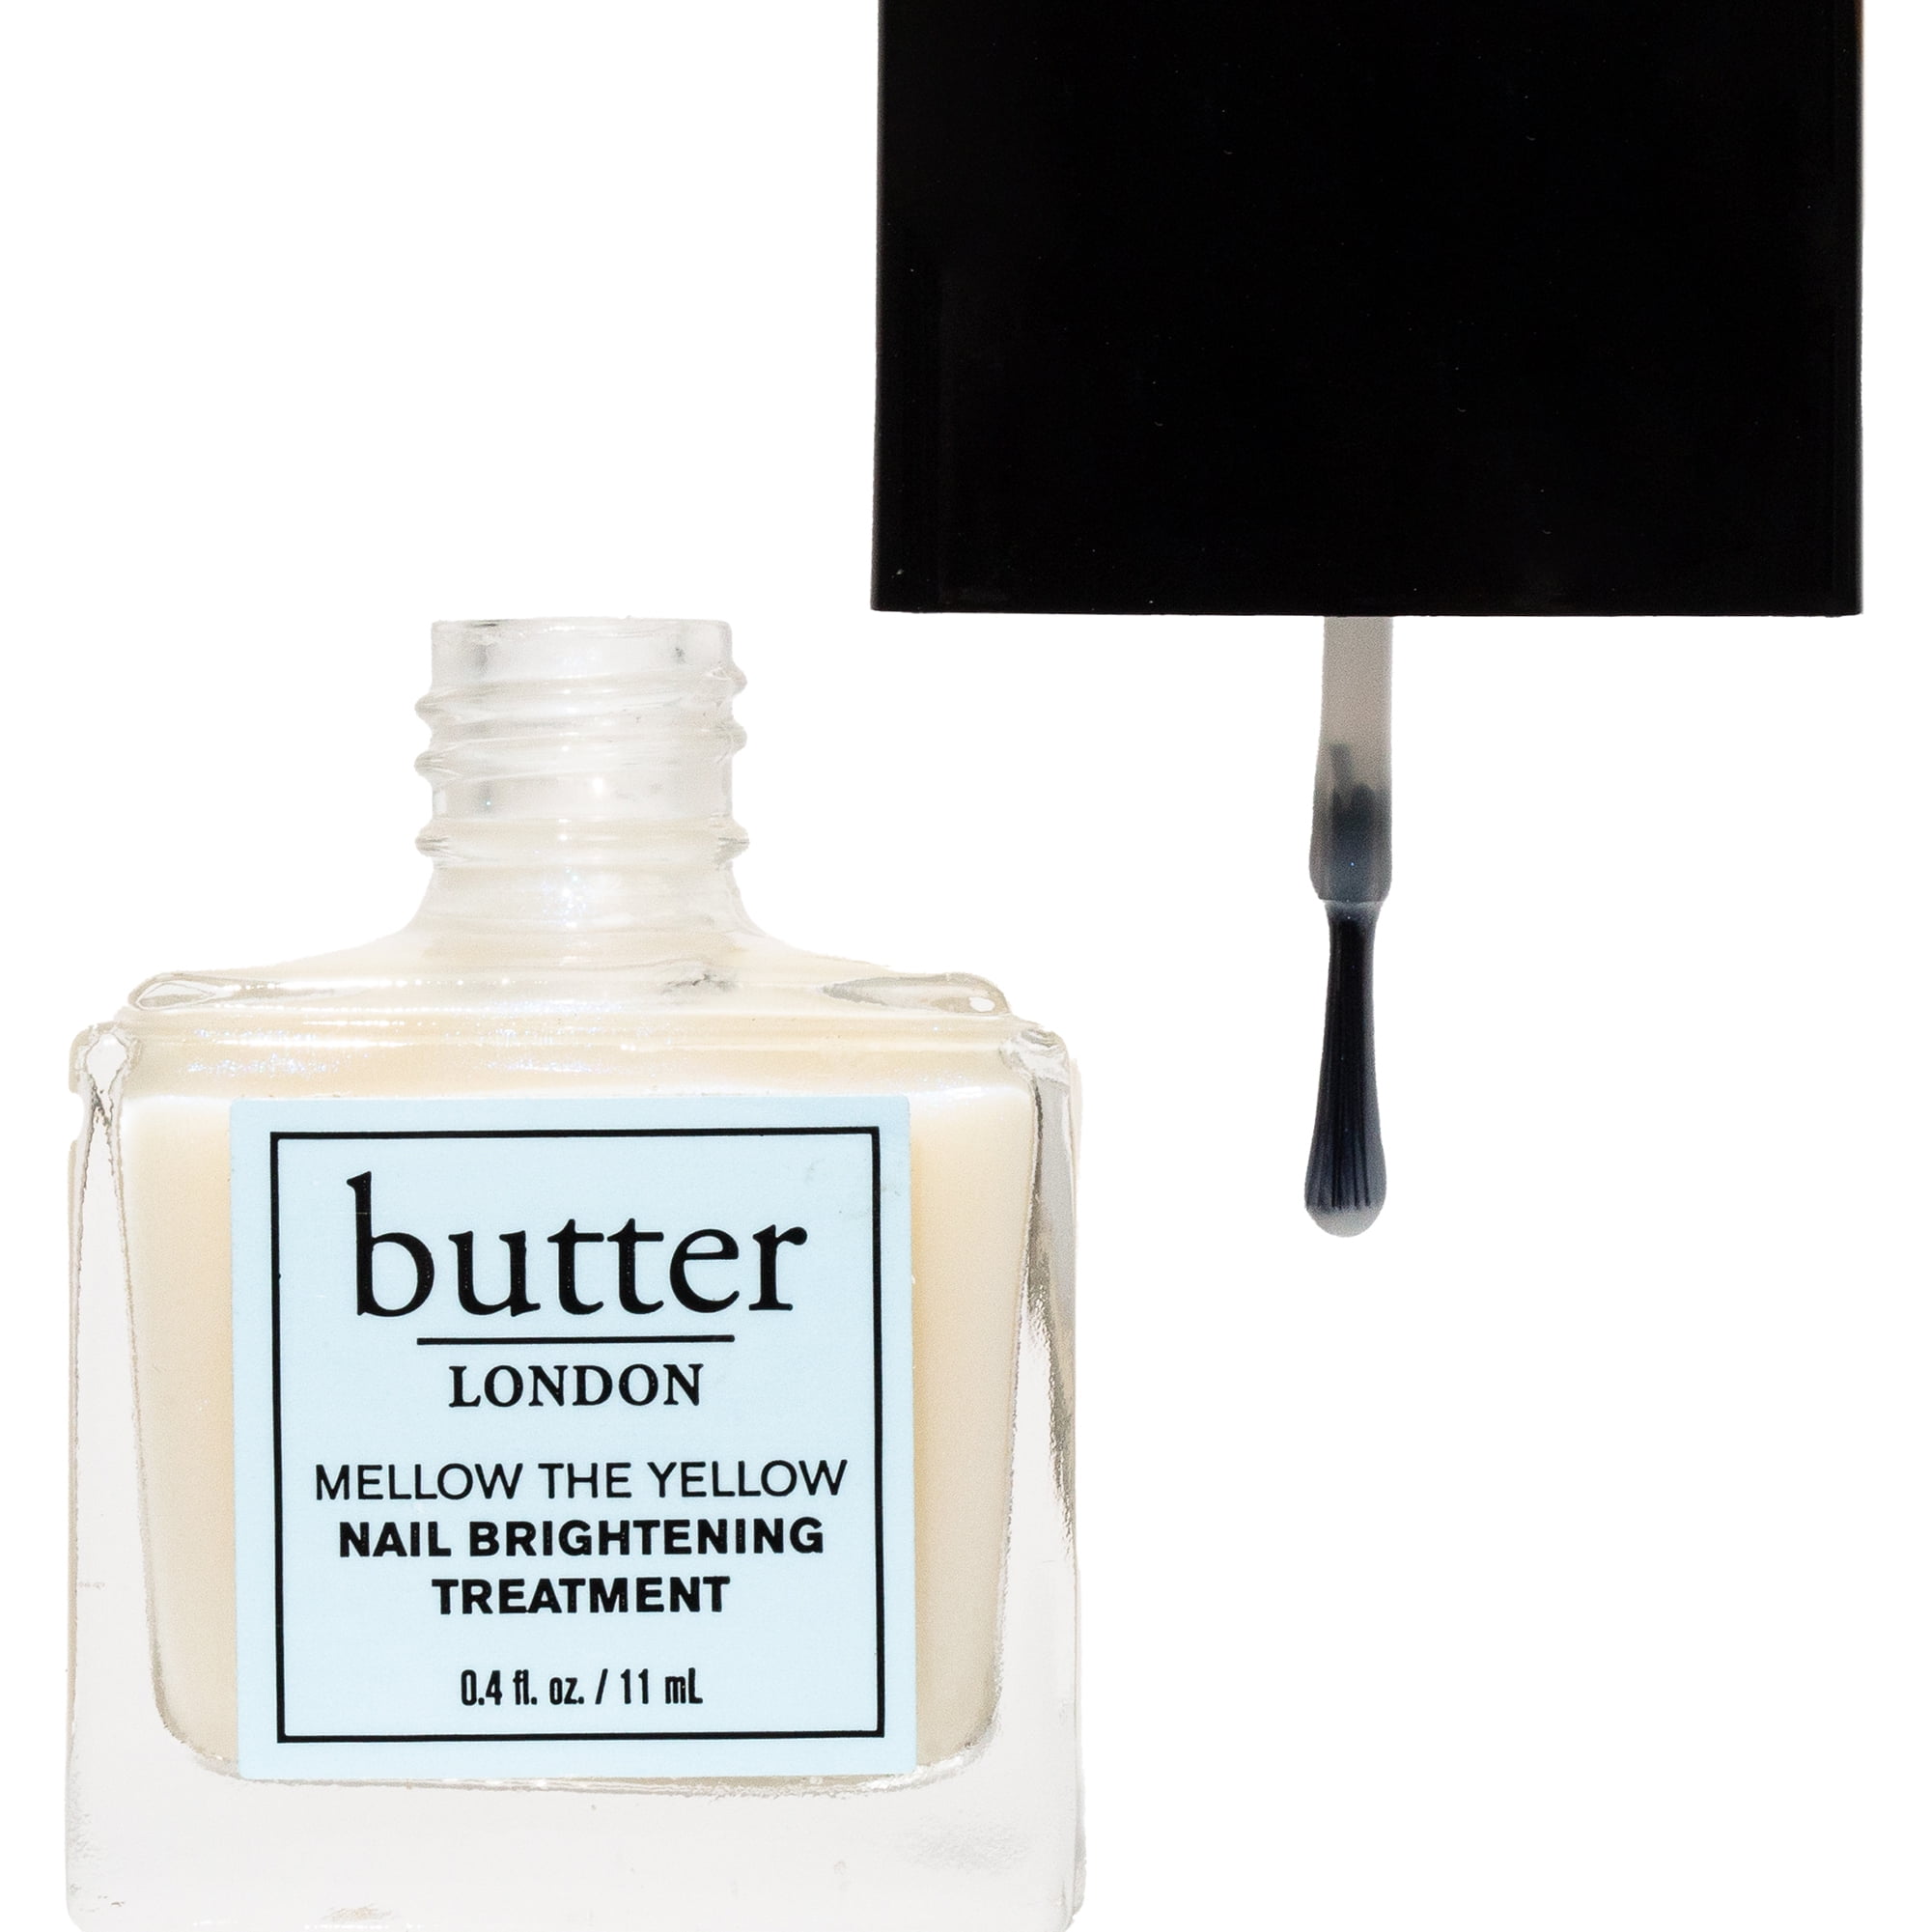 butter LONDON offers Nail Care Treatment, Make-up & More